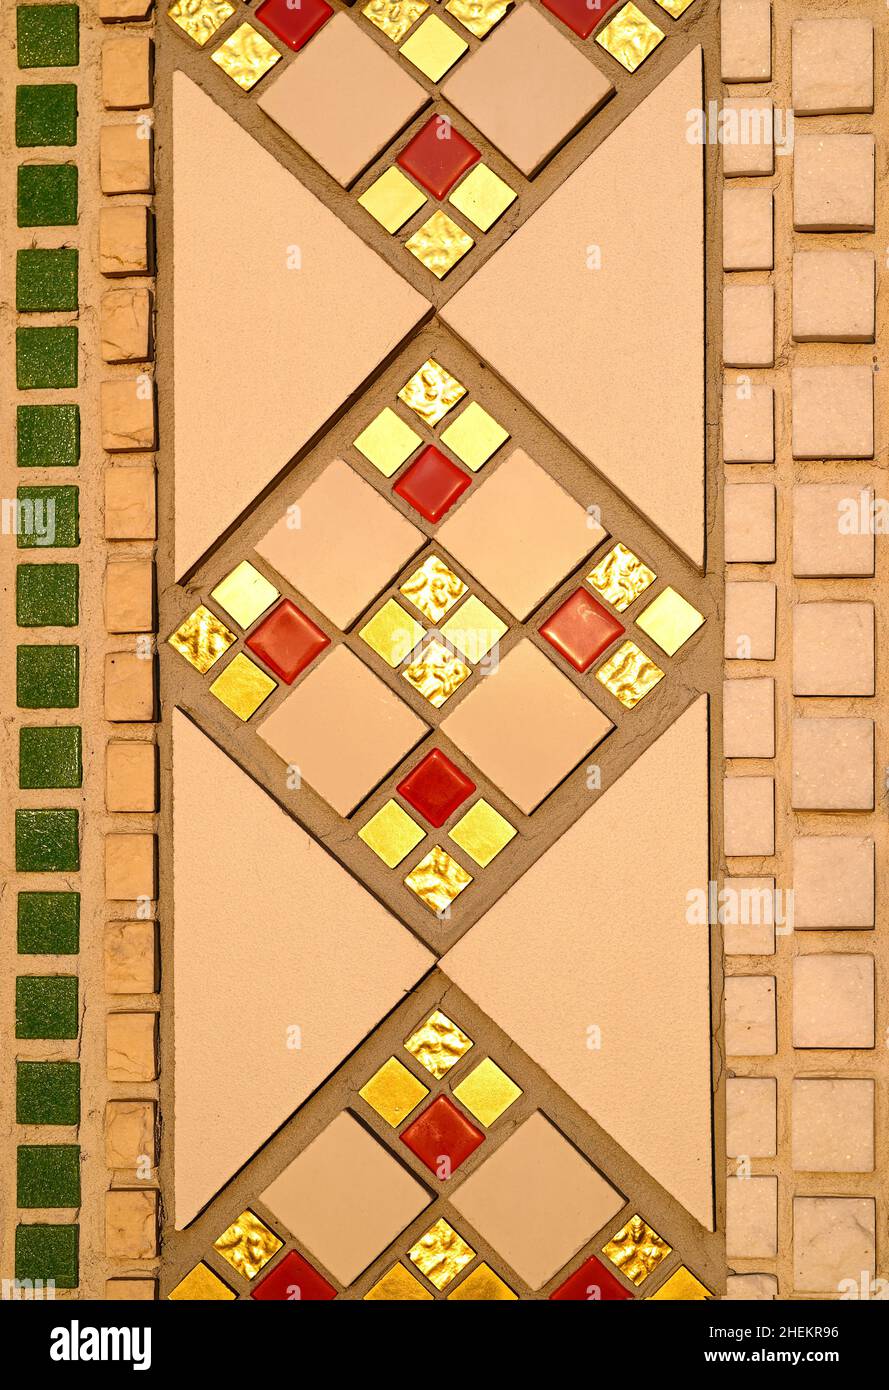 A fragment of a geometric repeating pattern from a ceramic mosaic on the wall of a Catholic church. Gold, red, beige and green mosaic tile. Stock Photo